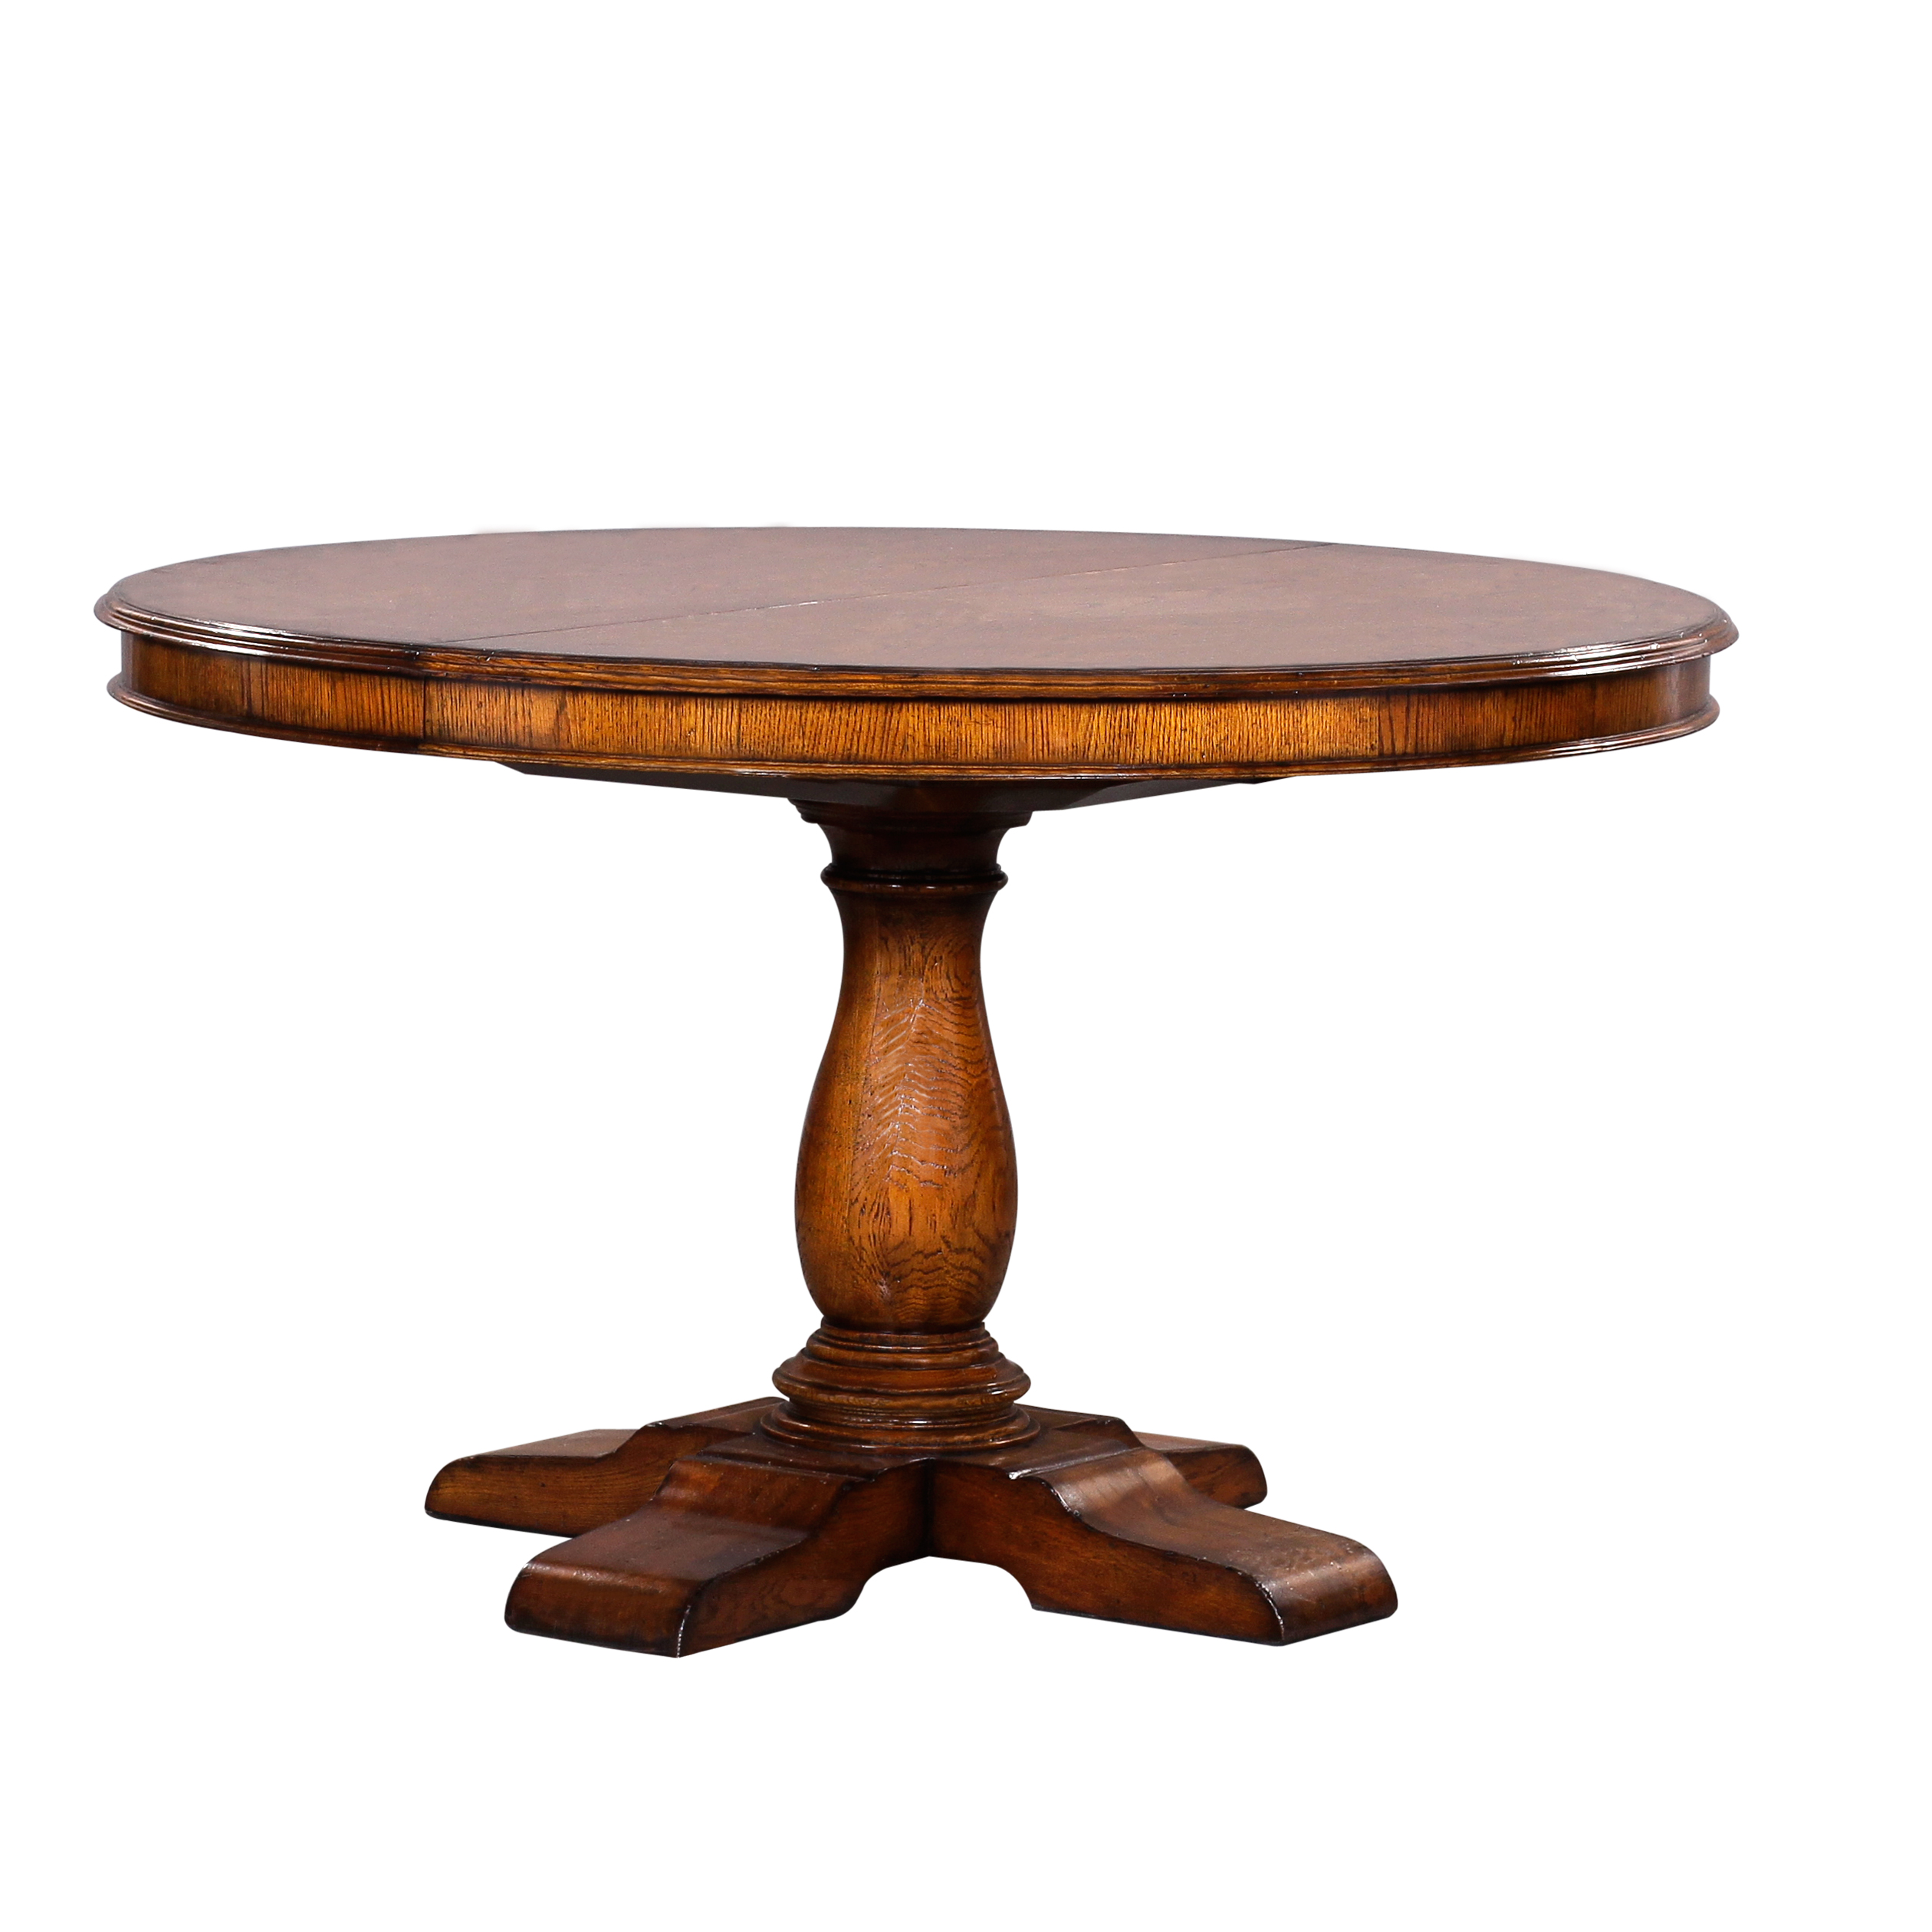 34621Oak---Round-Table-Oak-with-2-Leaves,-OMD-3